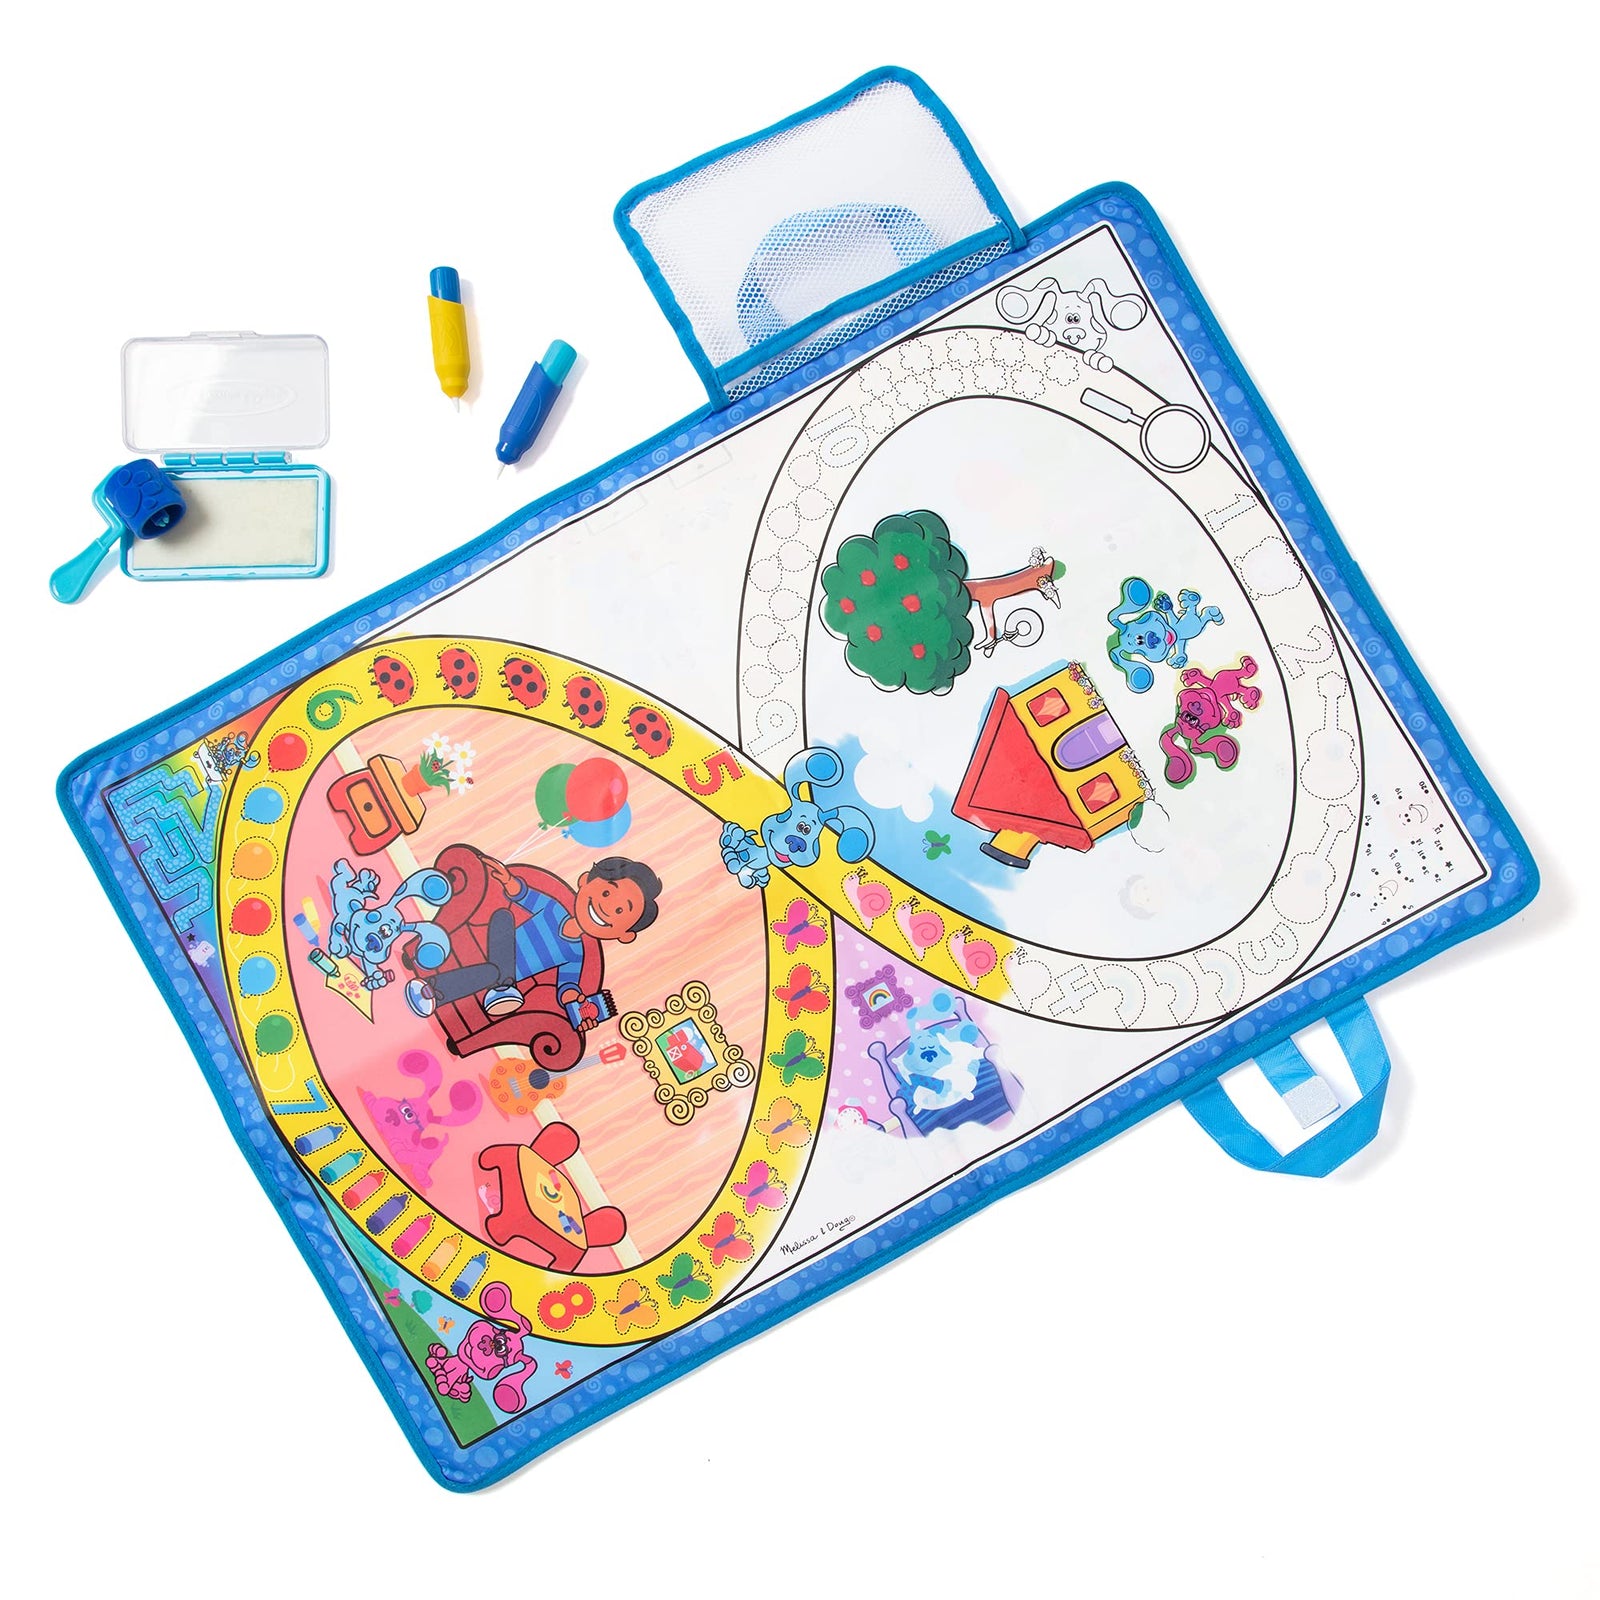 Melissa & Doug Blue's Clues & You! Water Wow! Activity Mat (20 Inches x 30 Inches) with Reusable Water Reveal Surface